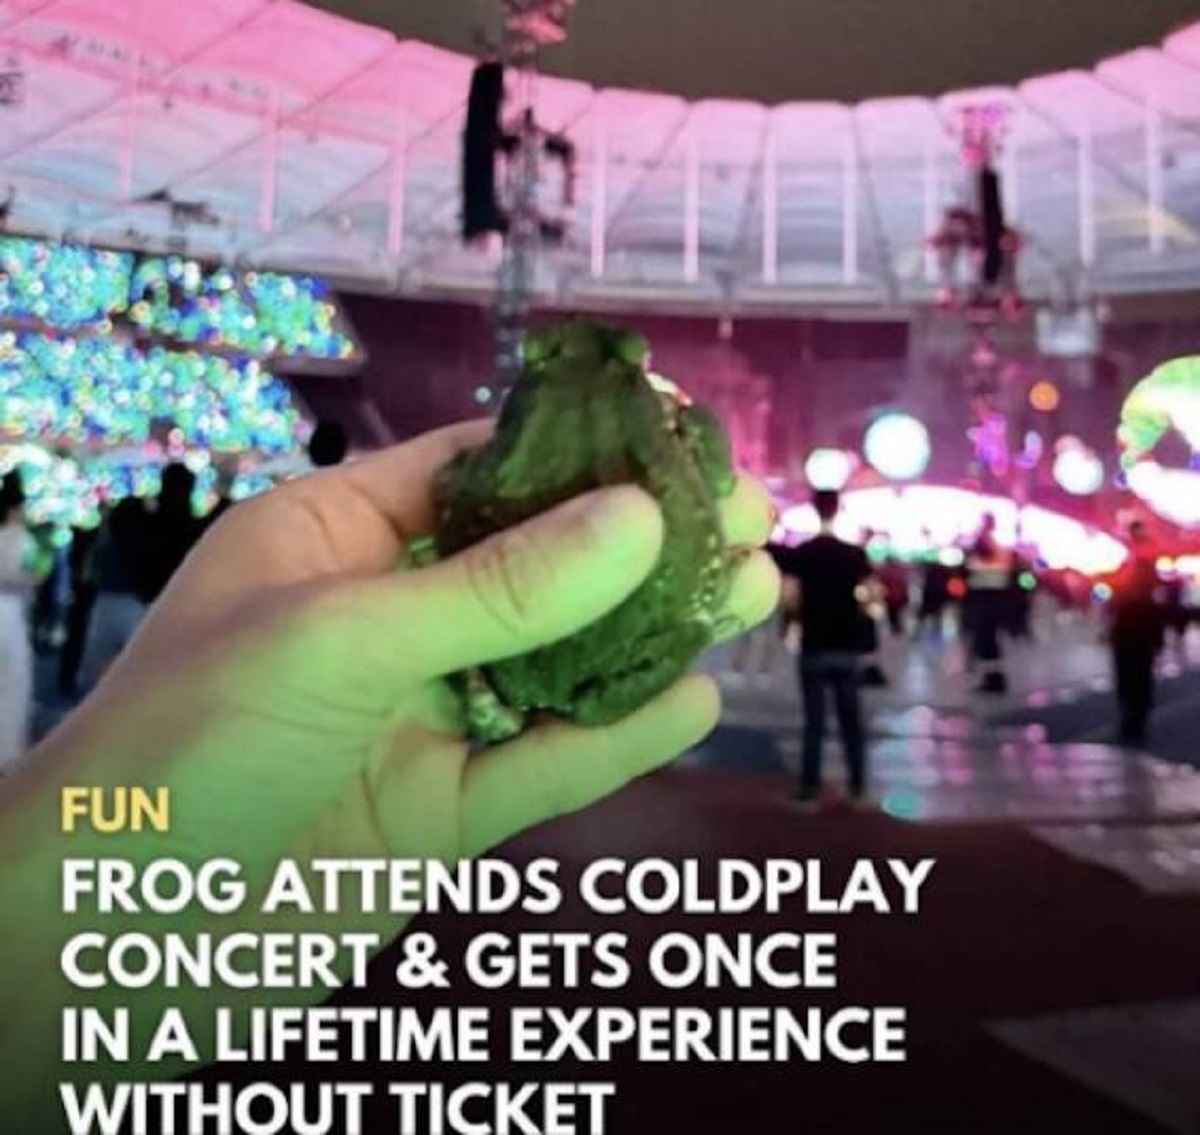 fun - Fun Frog Attends Coldplay Concert & Gets Once In A Lifetime Experience Without Ticket